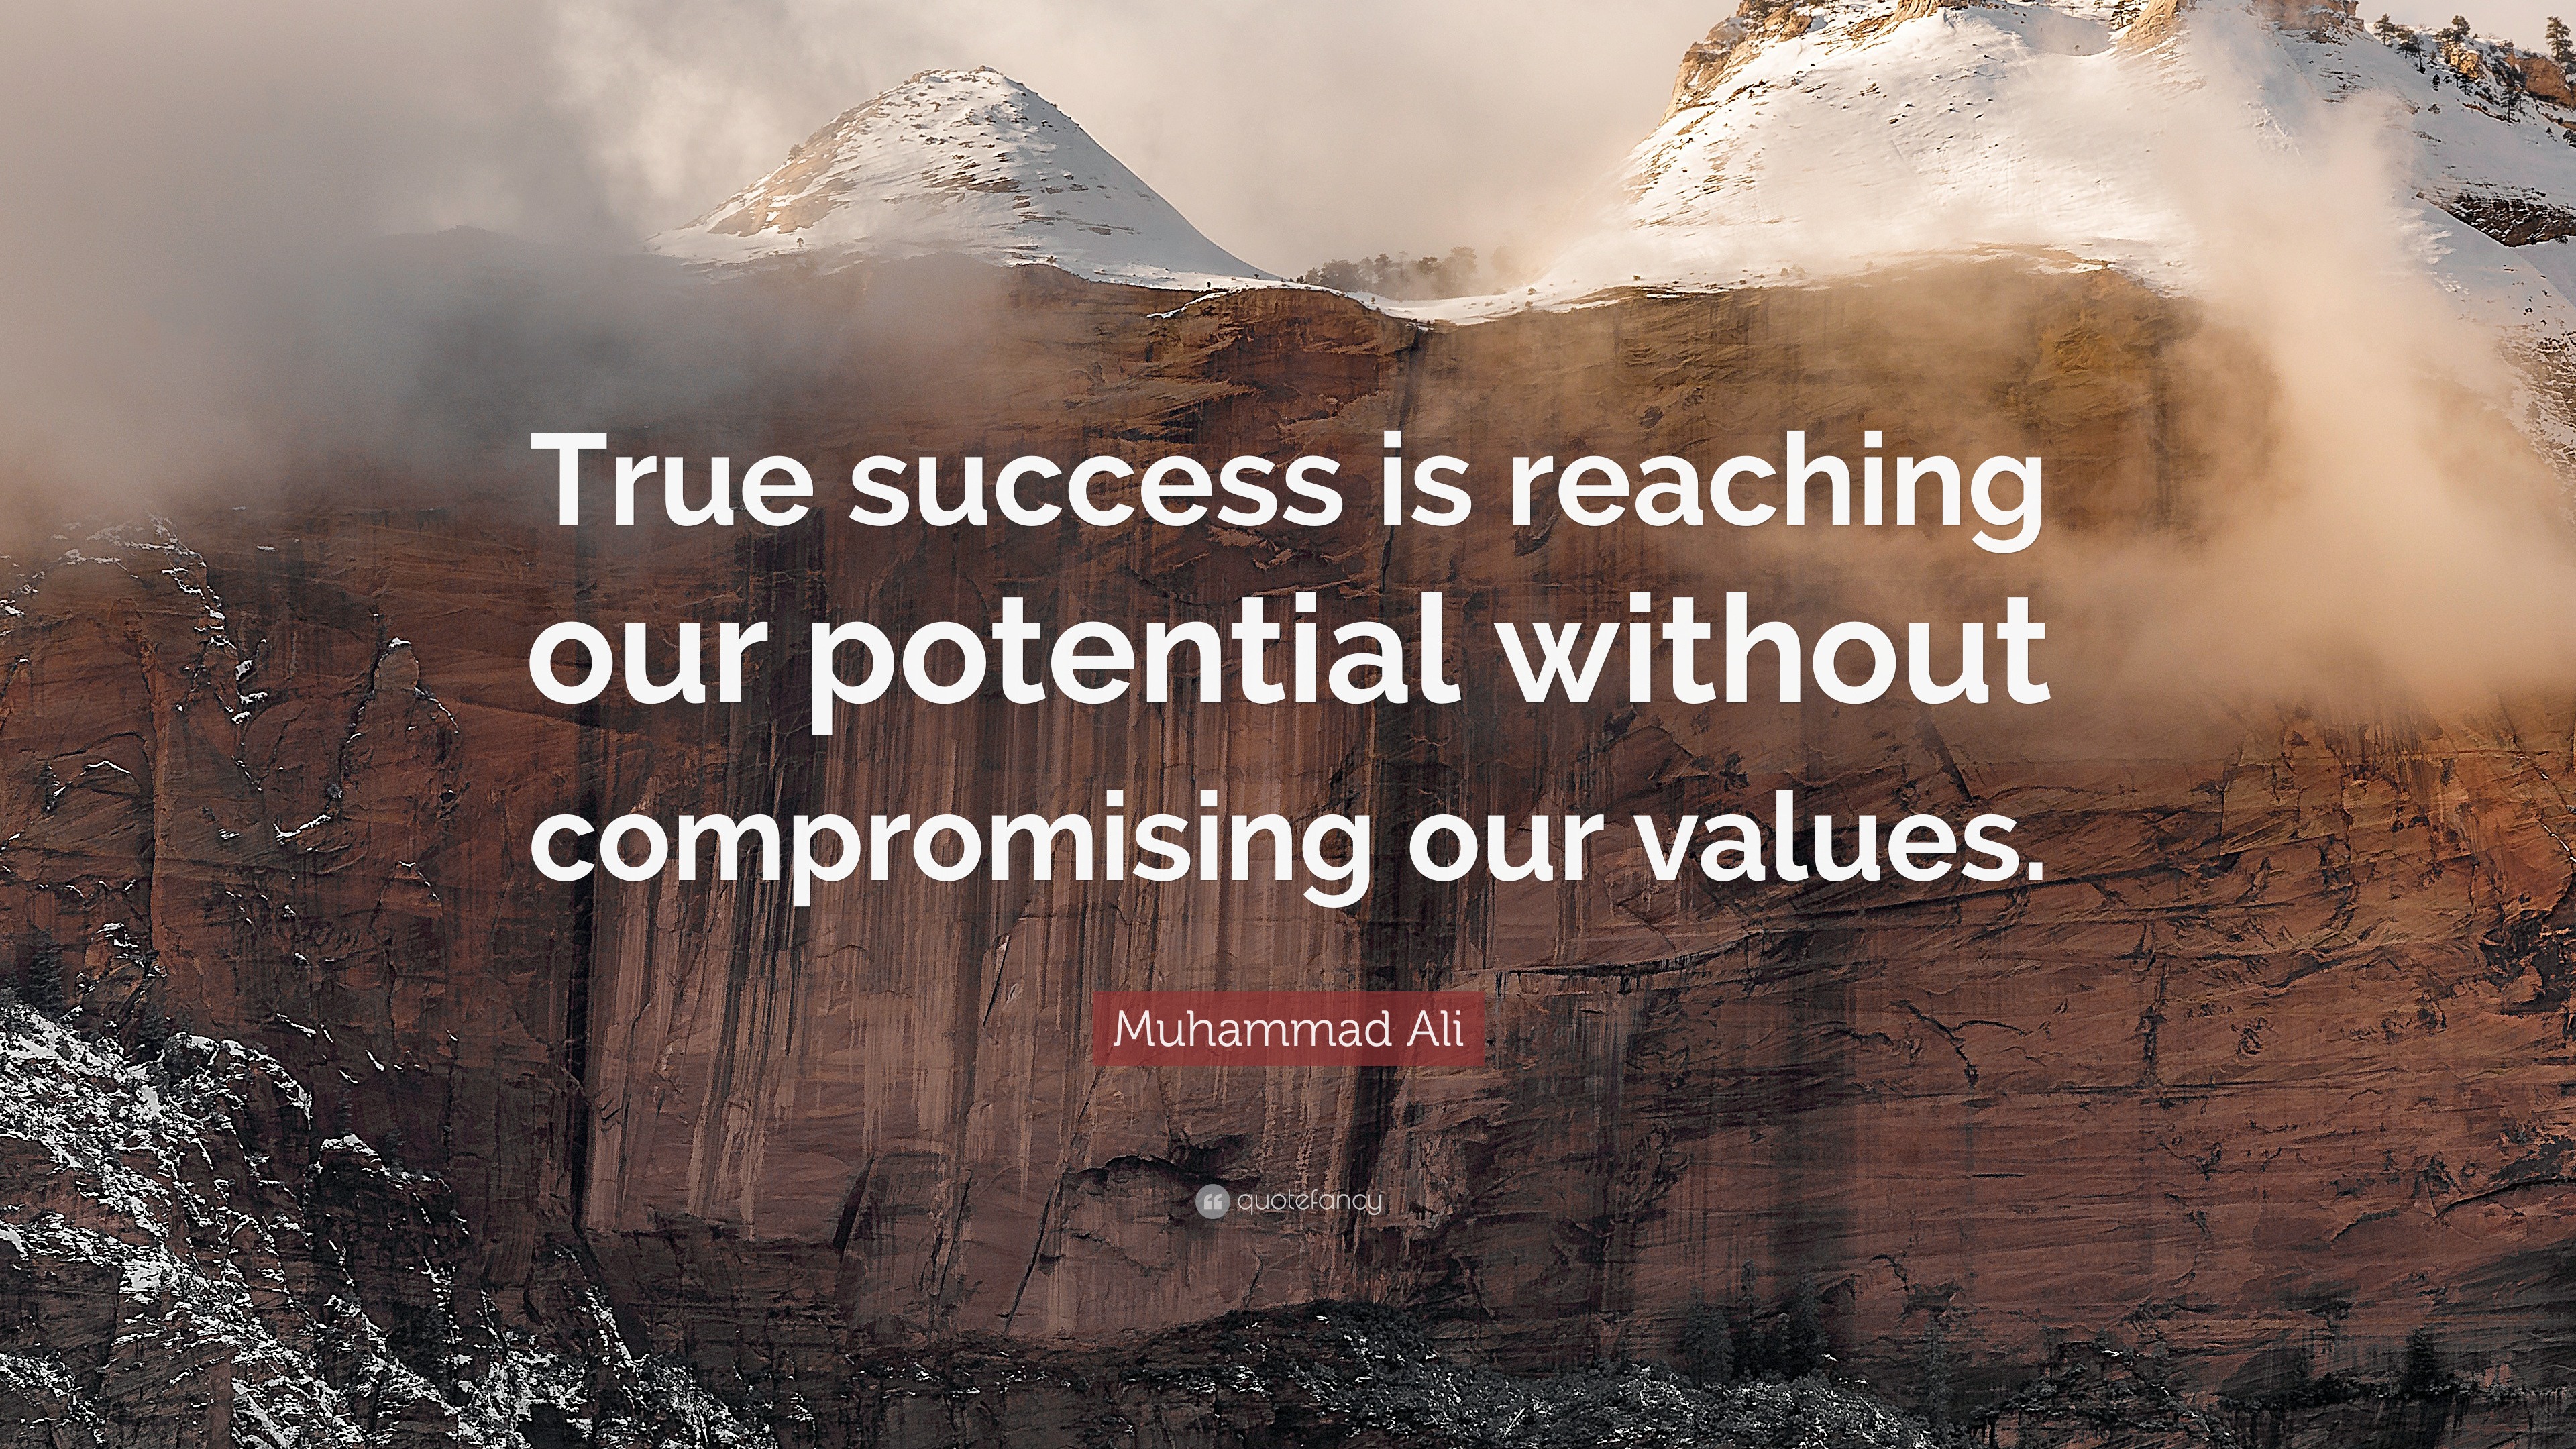 Muhammad Ali Quote: “True success is reaching our potential without